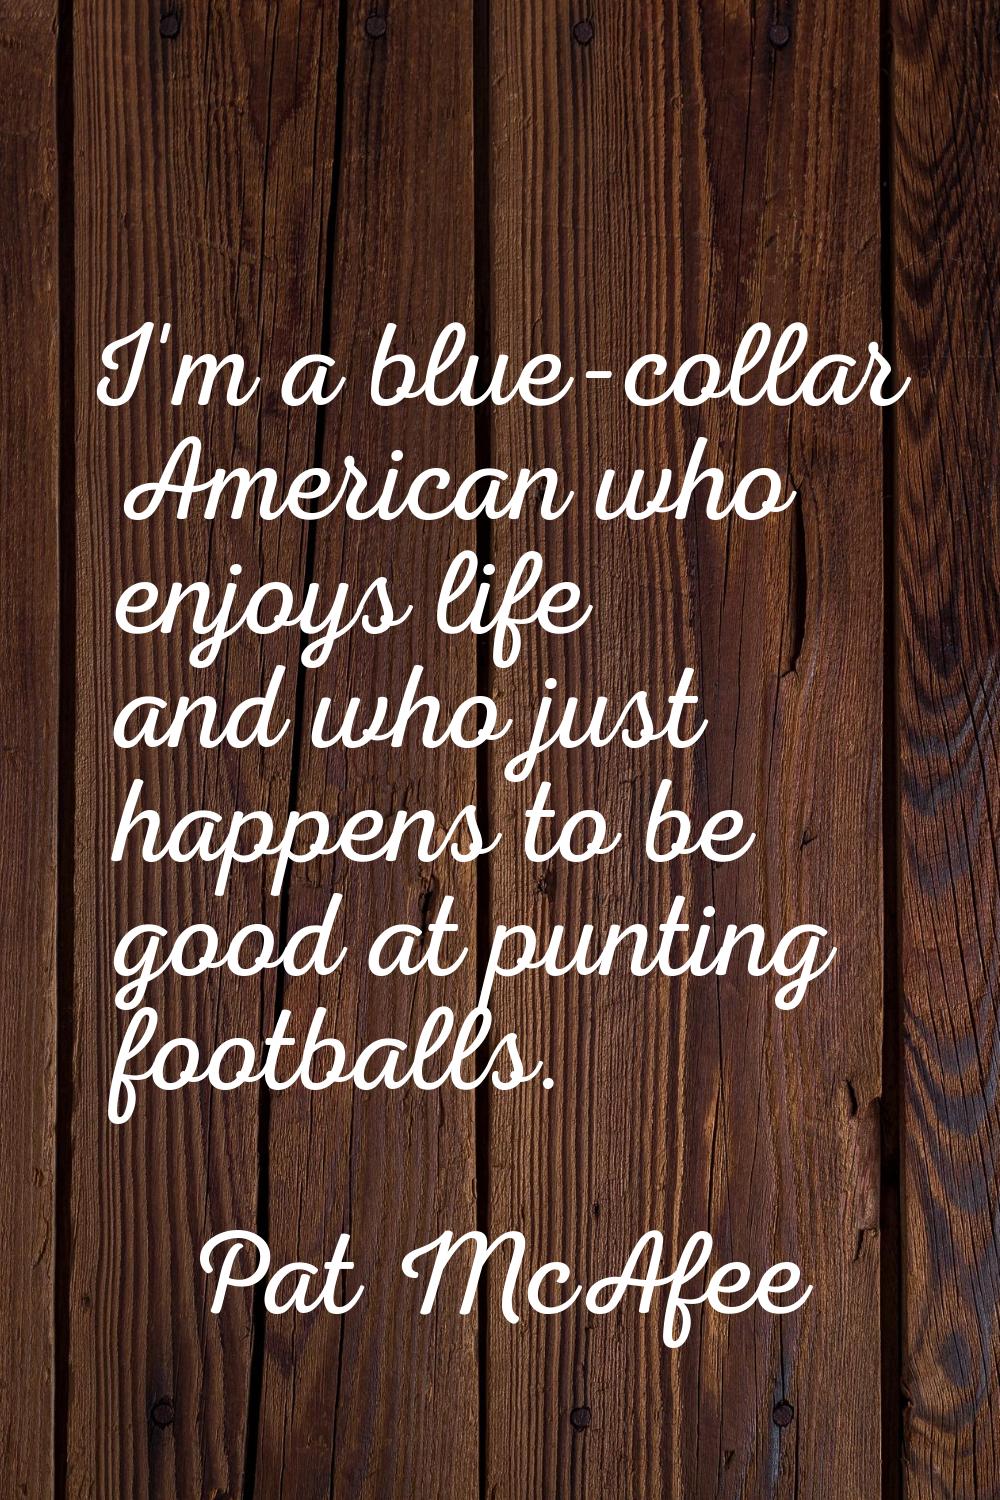 I'm a blue-collar American who enjoys life and who just happens to be good at punting footballs.